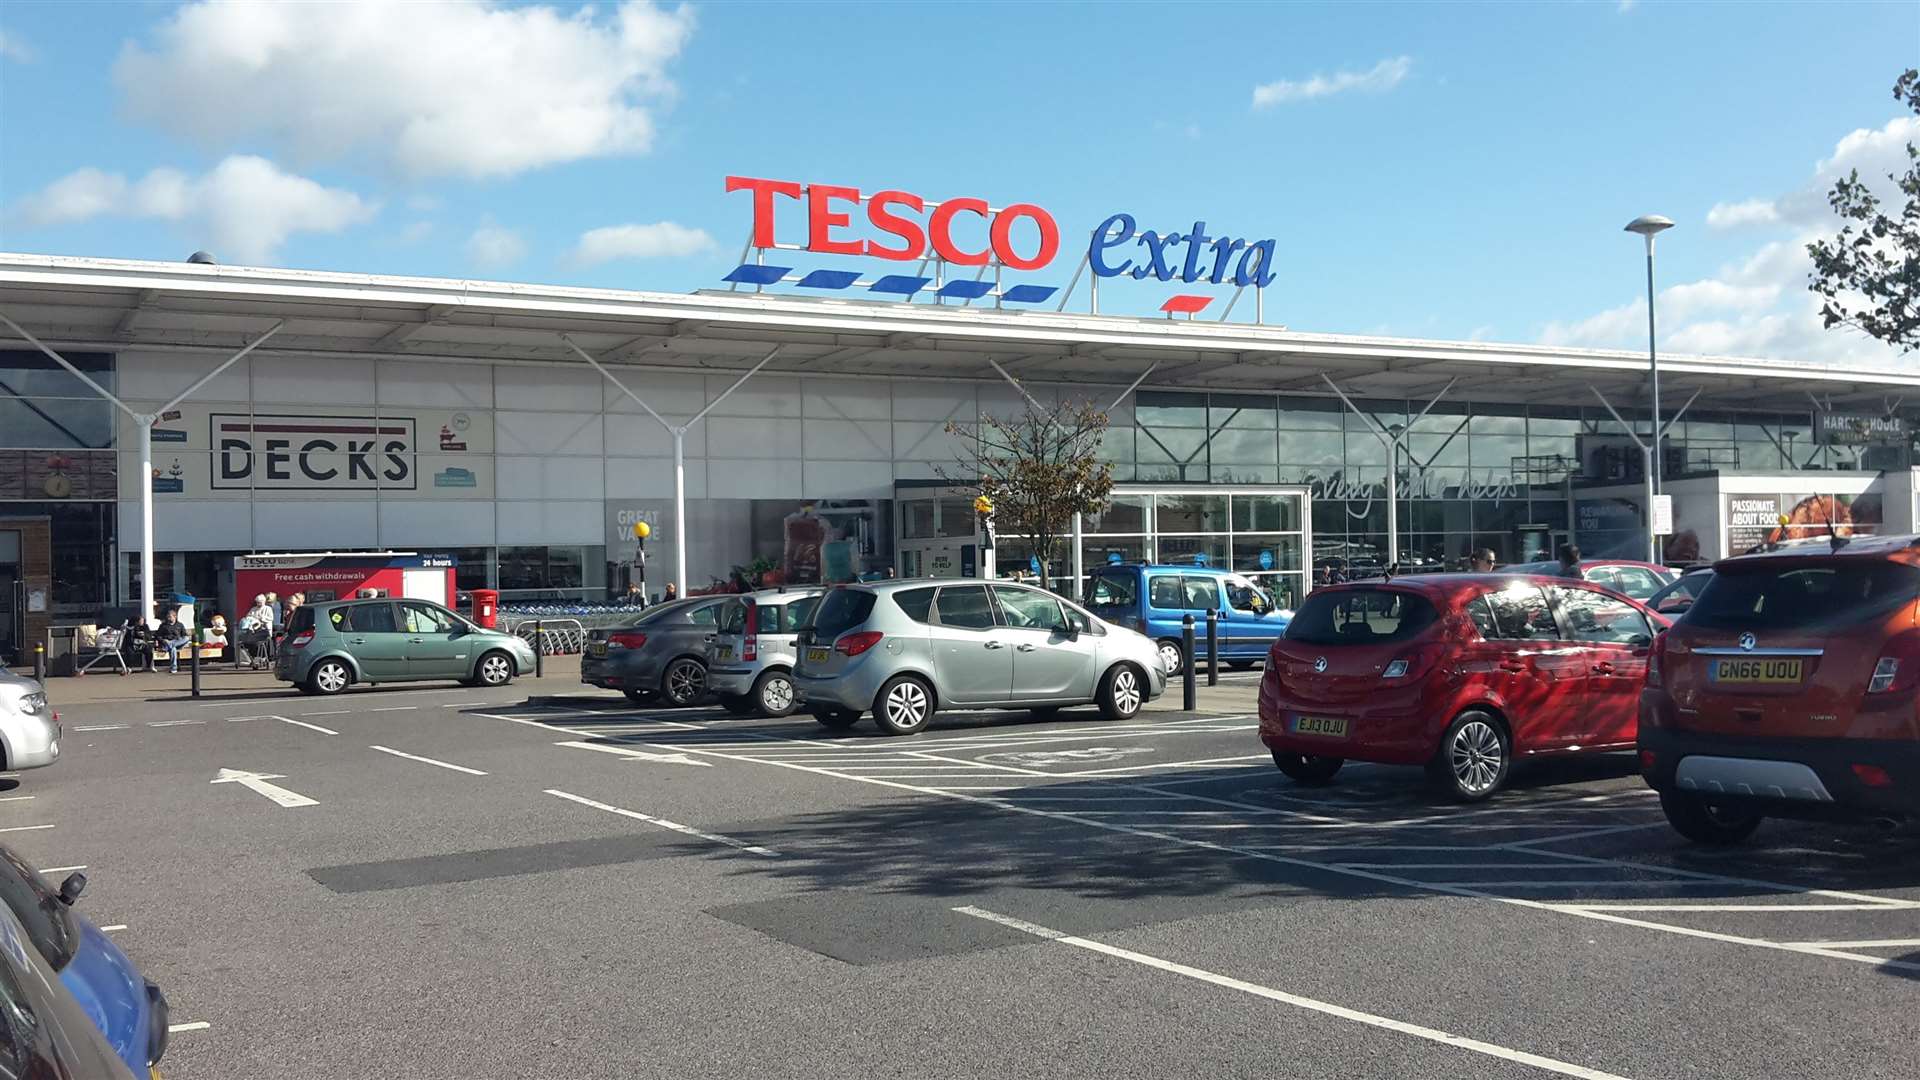 The attack happened at Tesco in Broadstairs